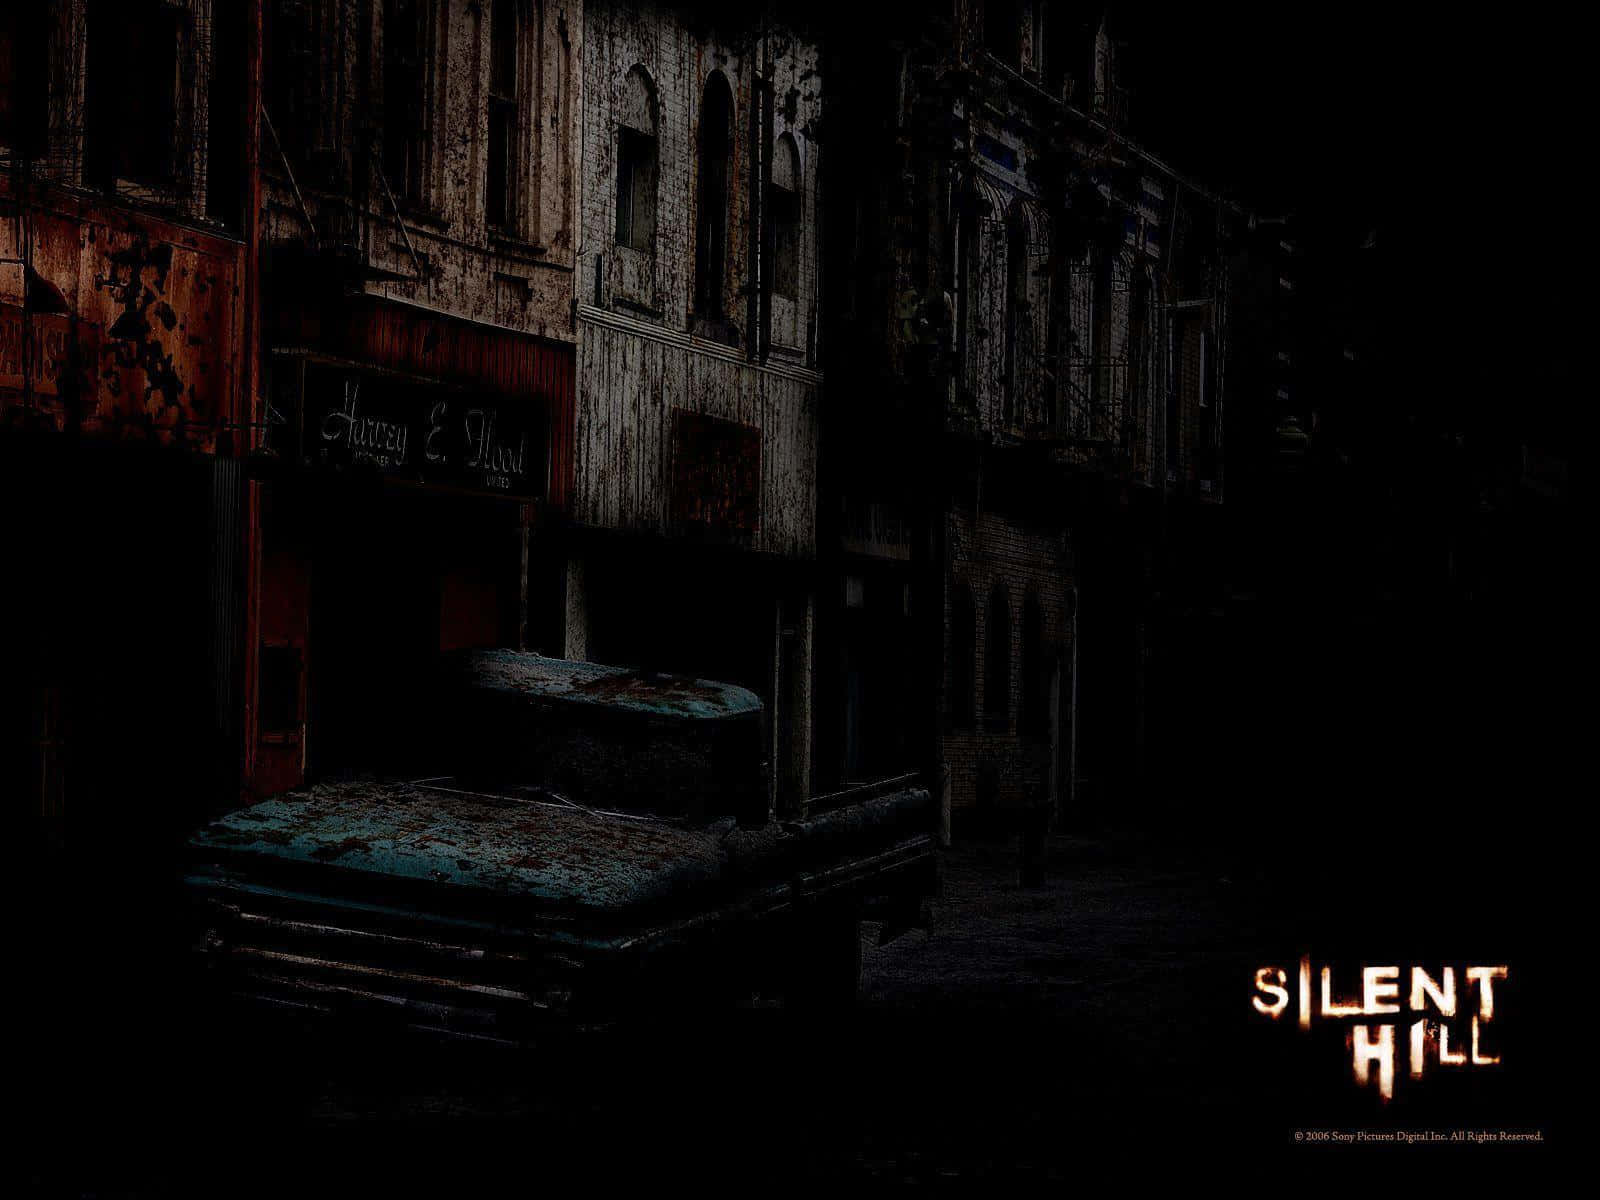 Explore the mysteriousness of Silent Hill